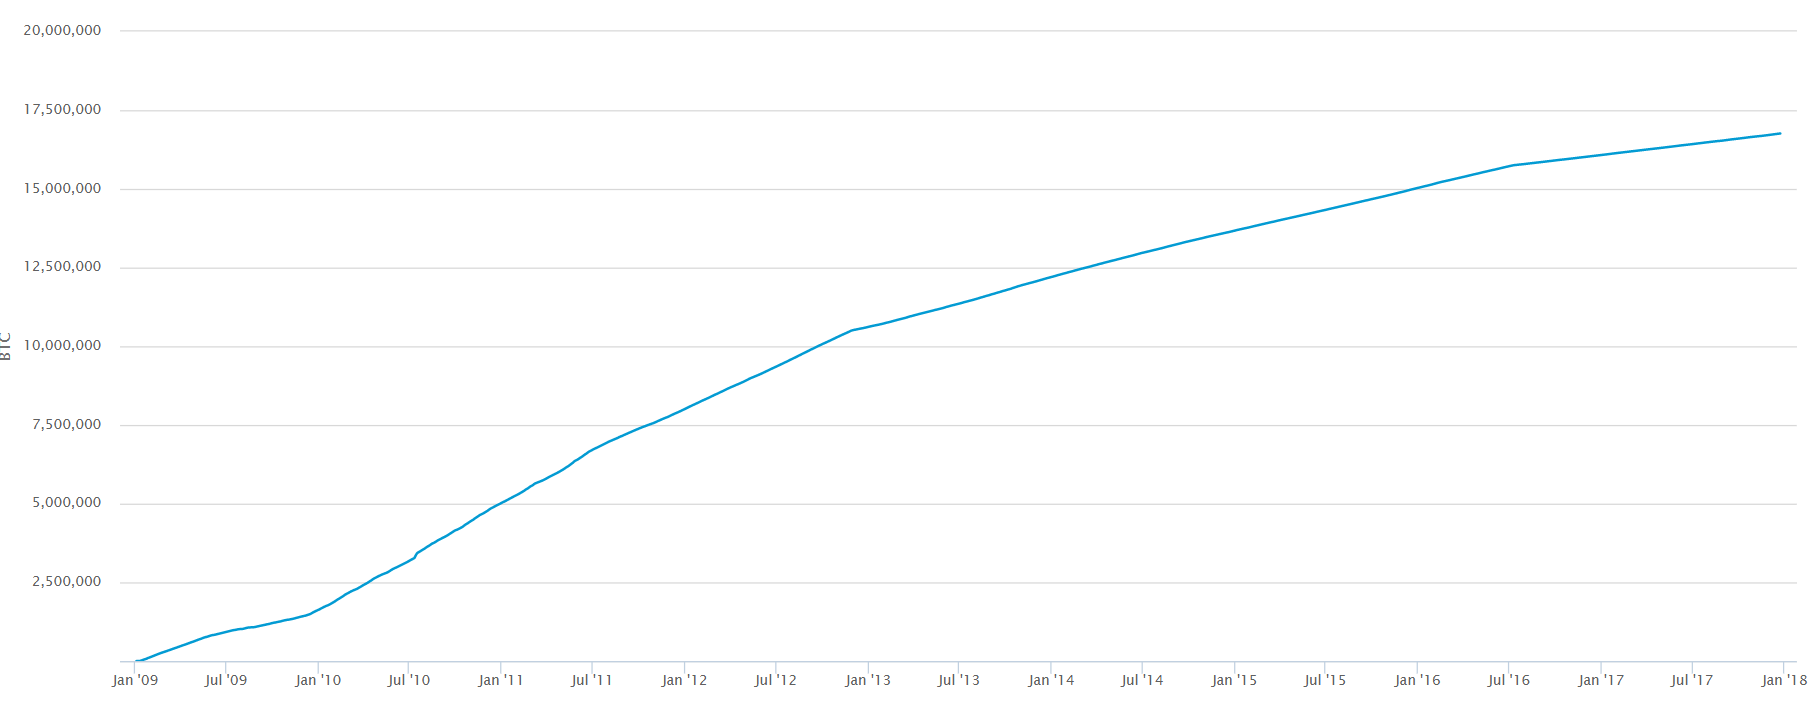 Bitcoins issued by 2018